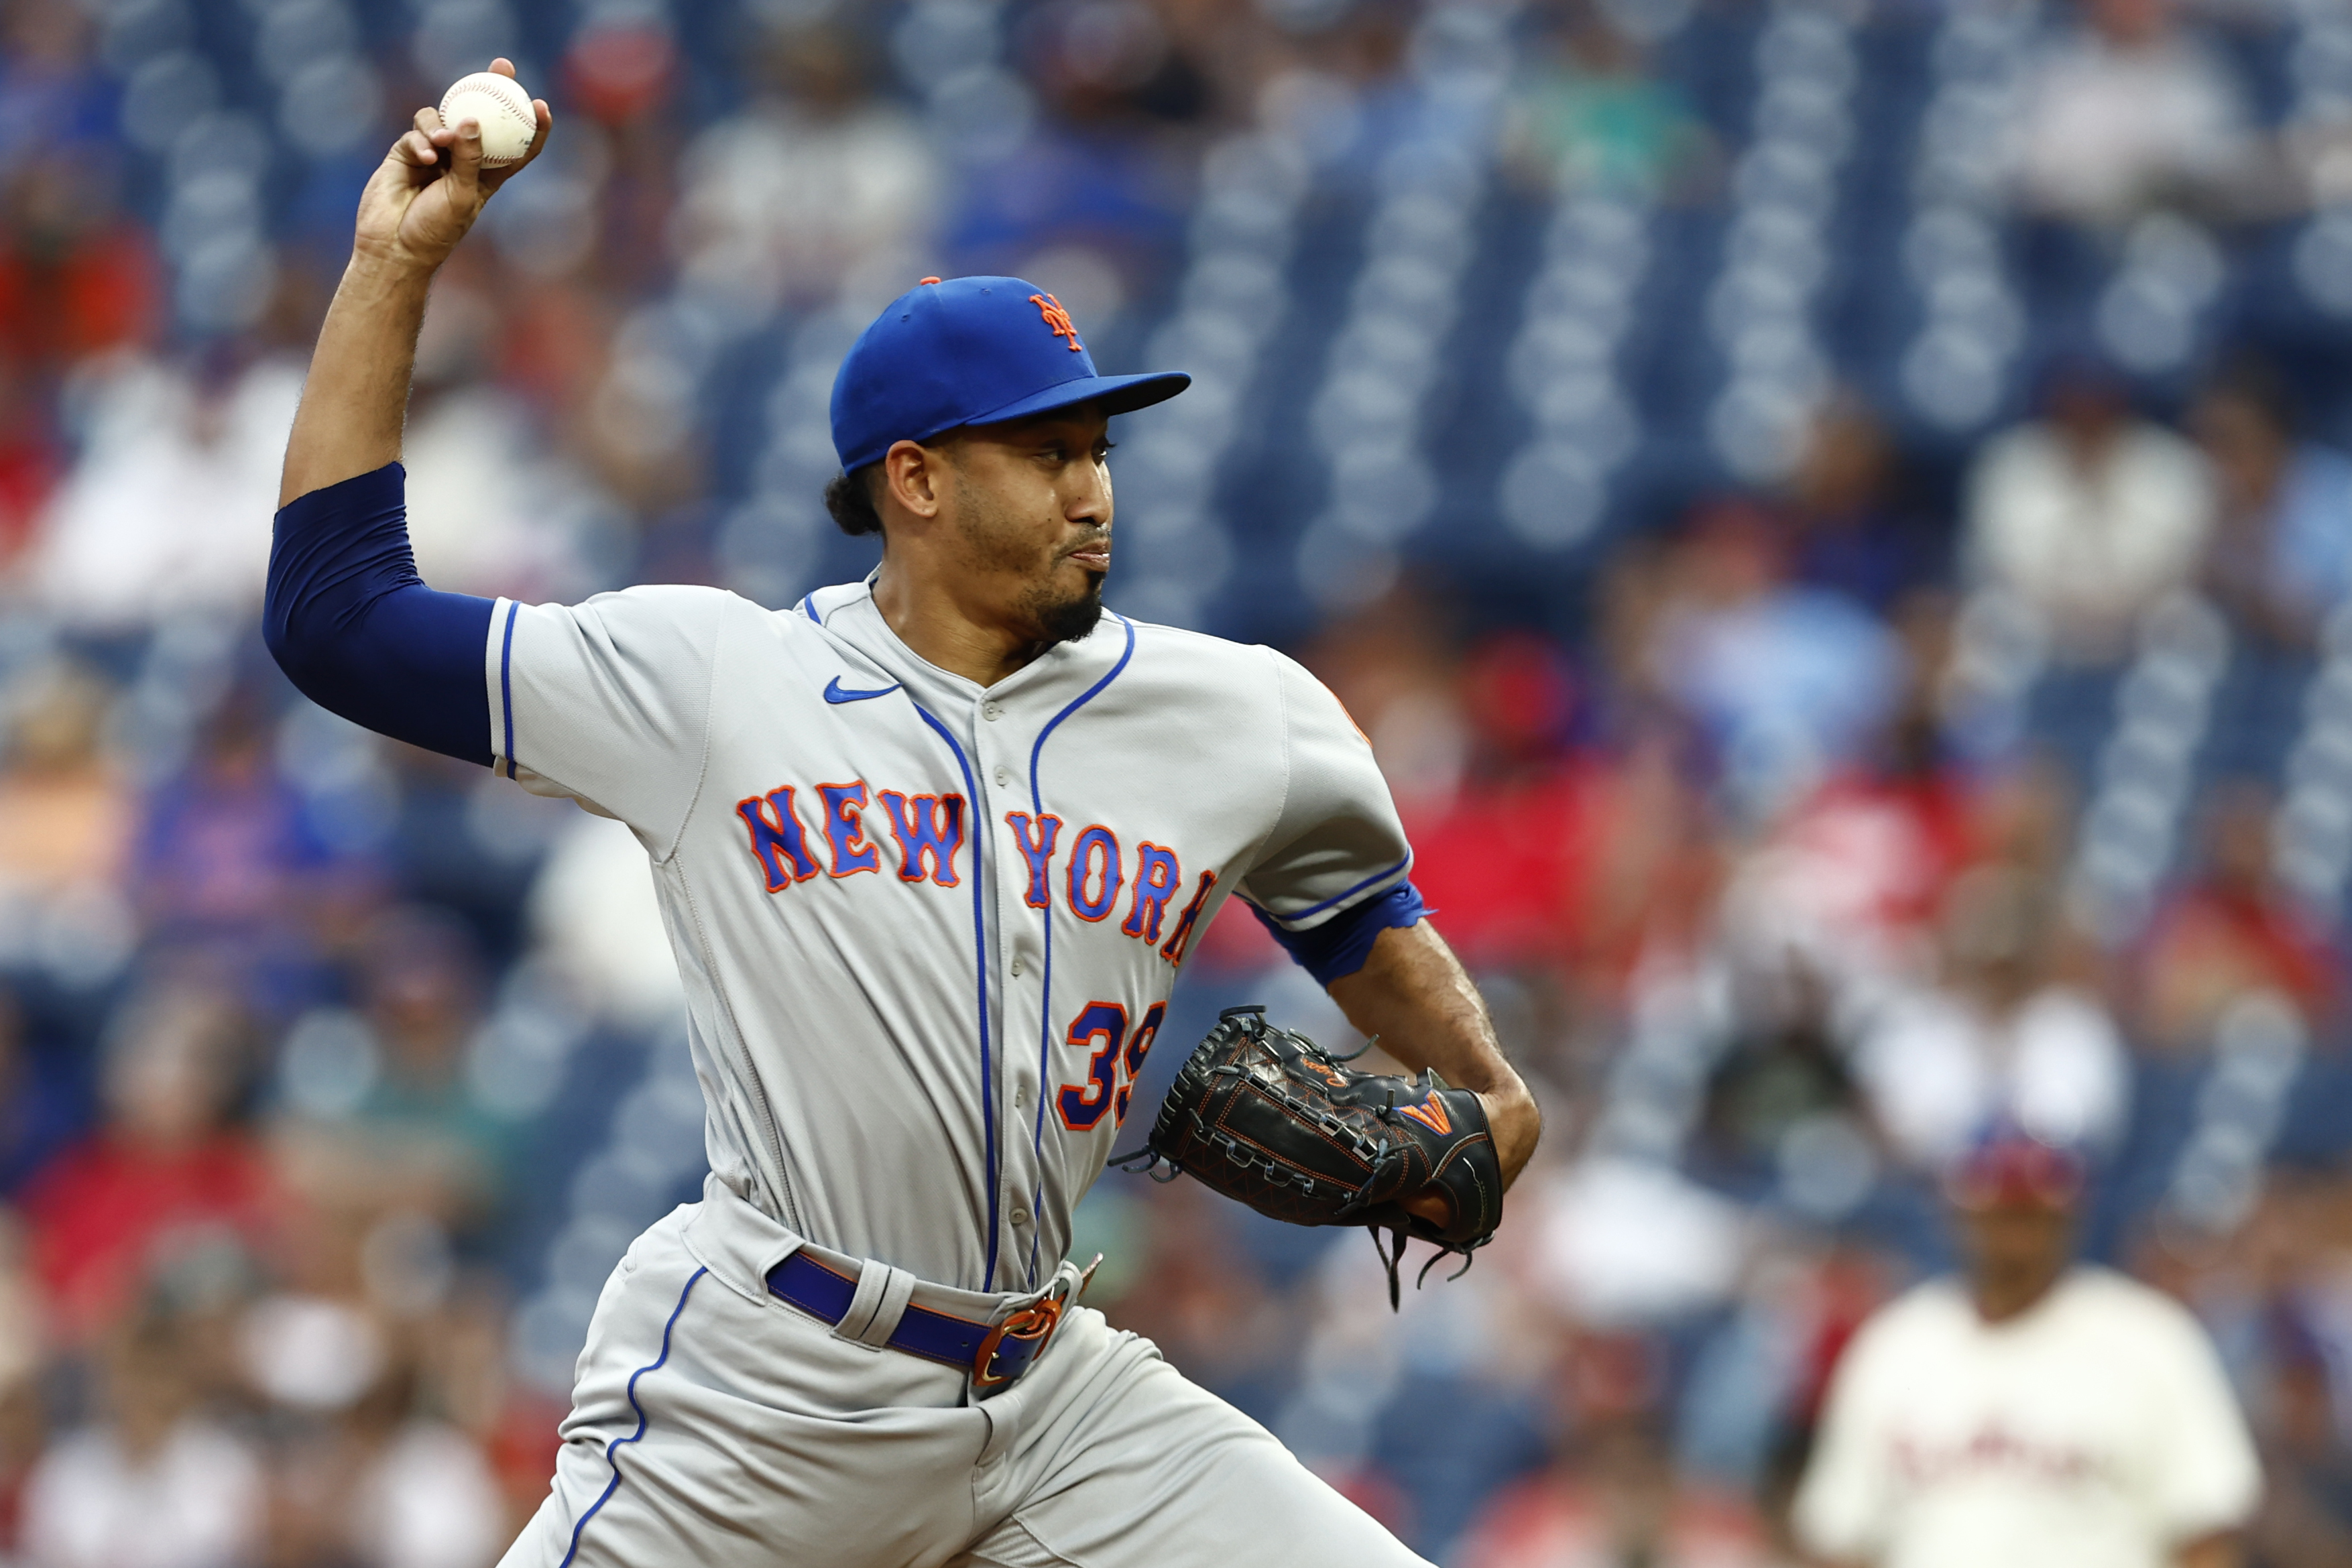 The story behind Mets closer Edwin Diaz's 'Narco' entrance